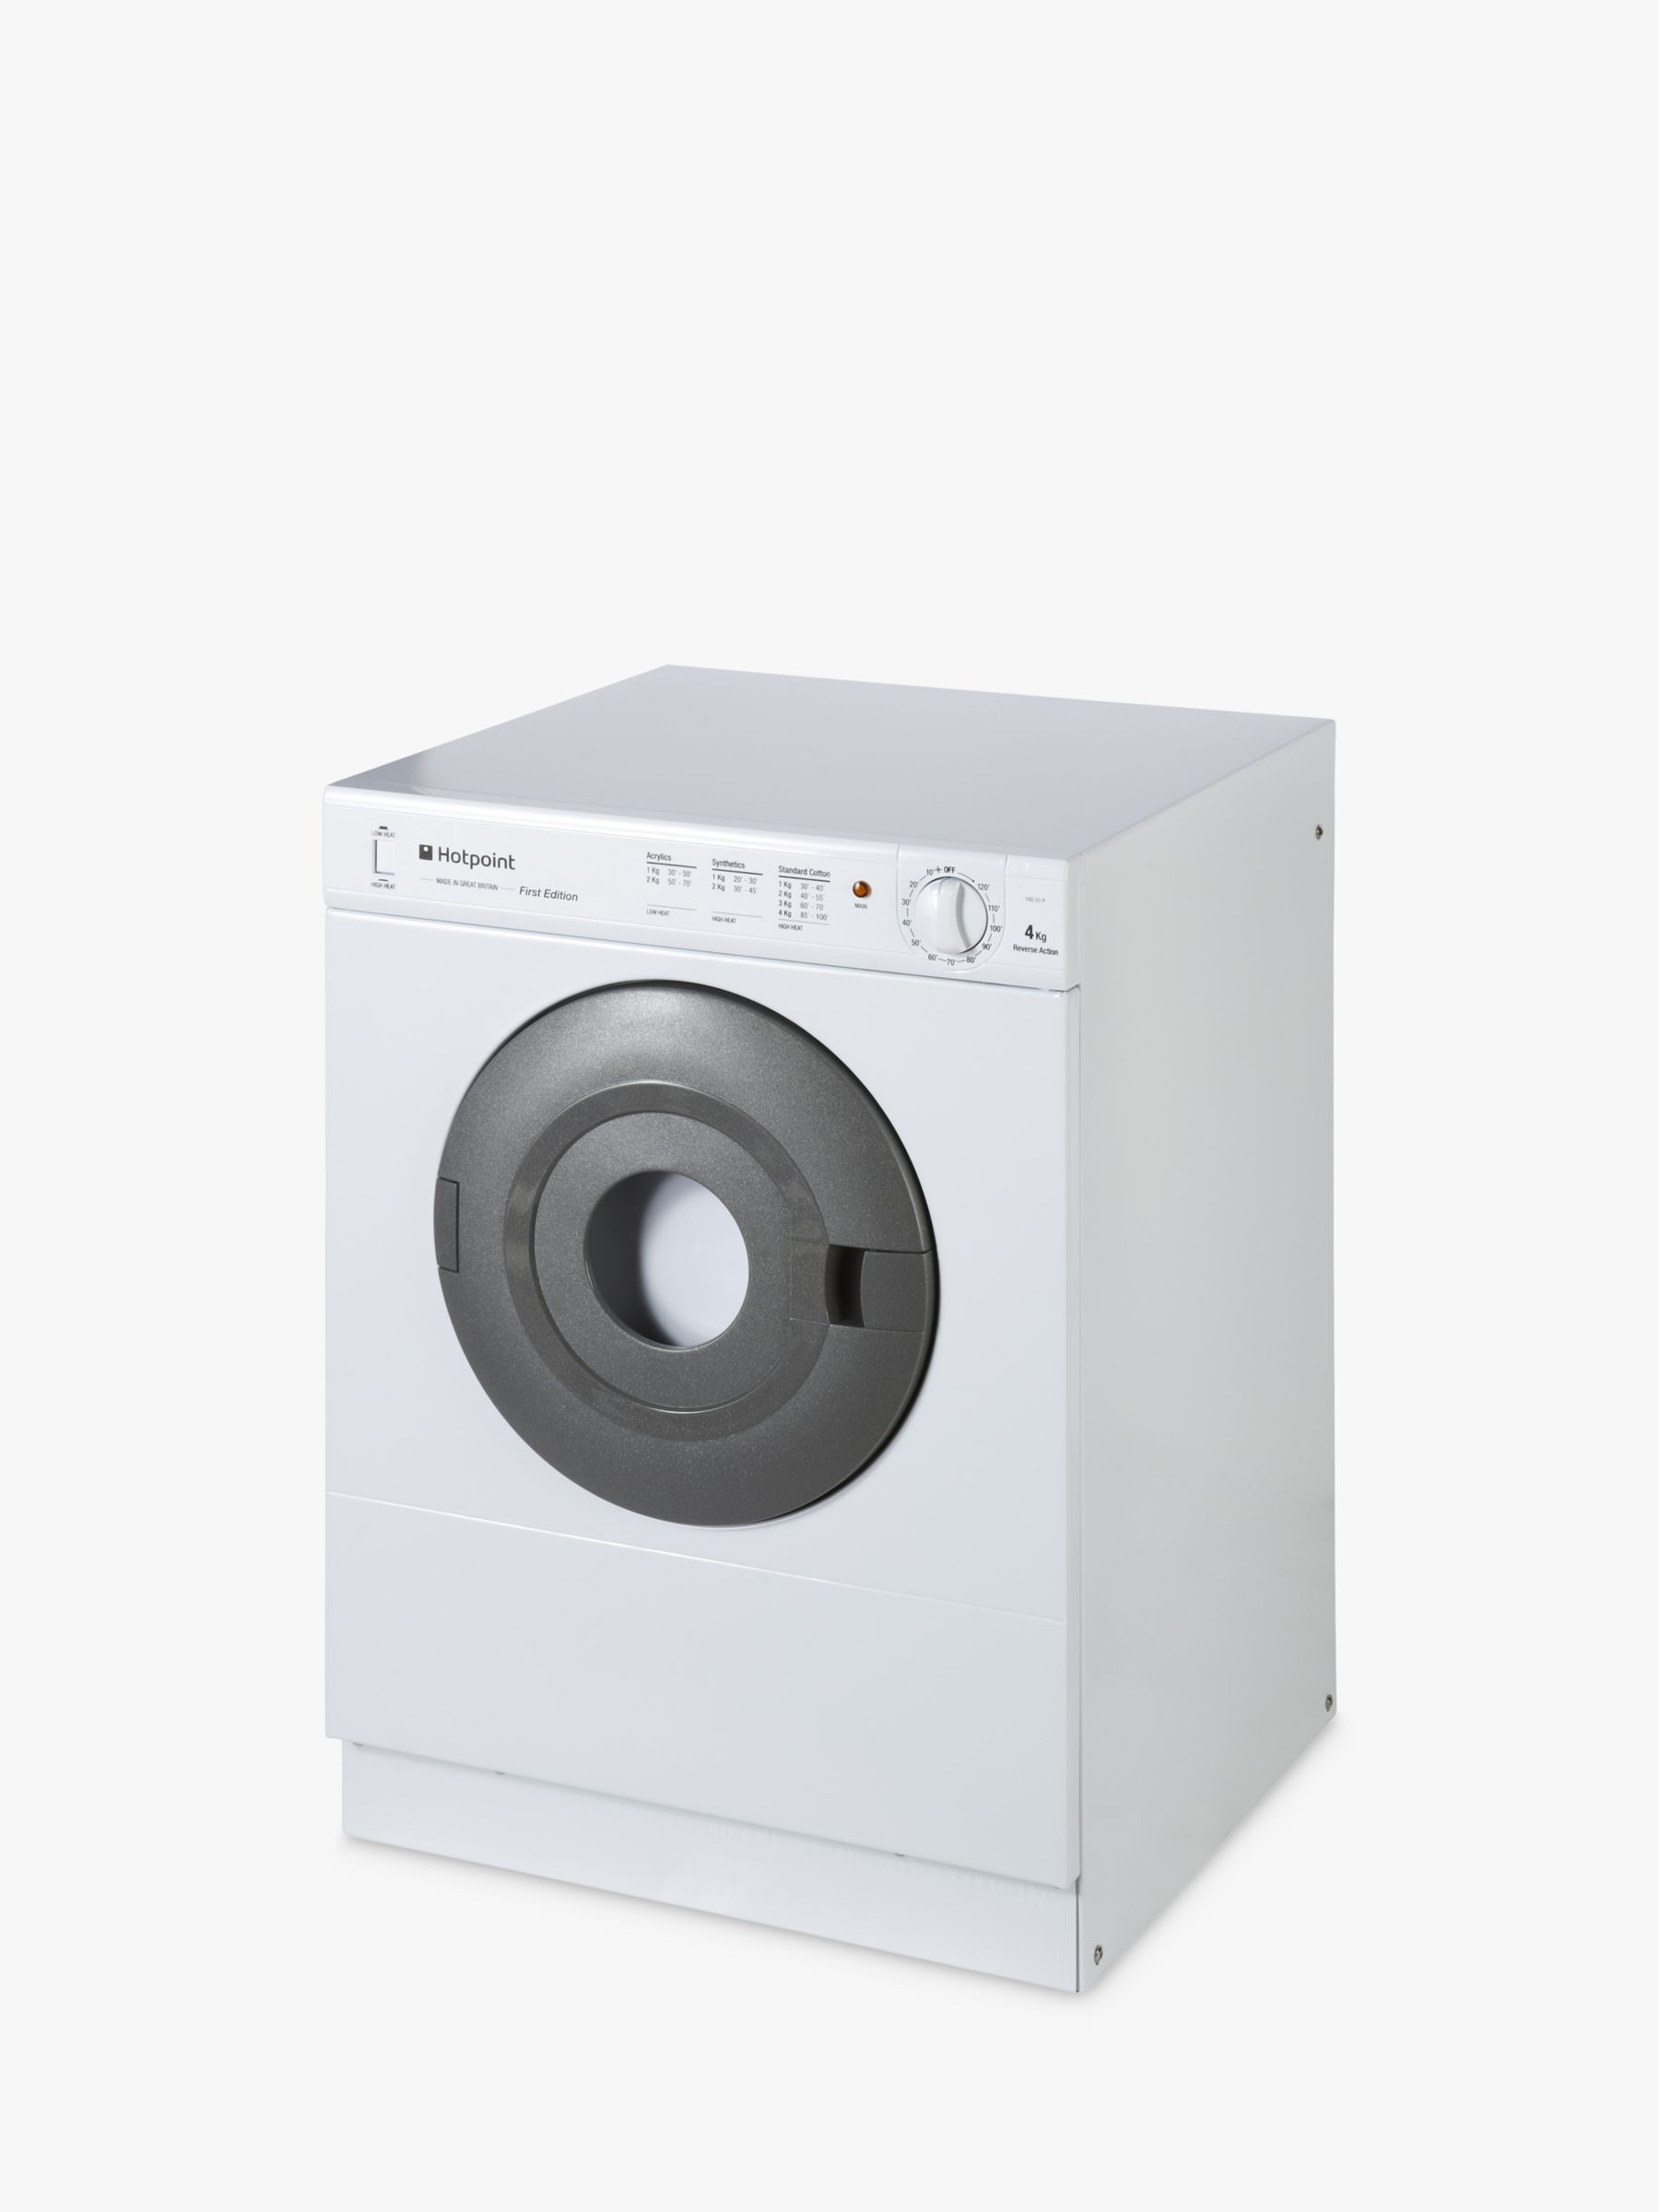 Hotpoint V4D01P Vented Compact Tumble Dryer, 4kg Load, C Energy Rating, Polar White